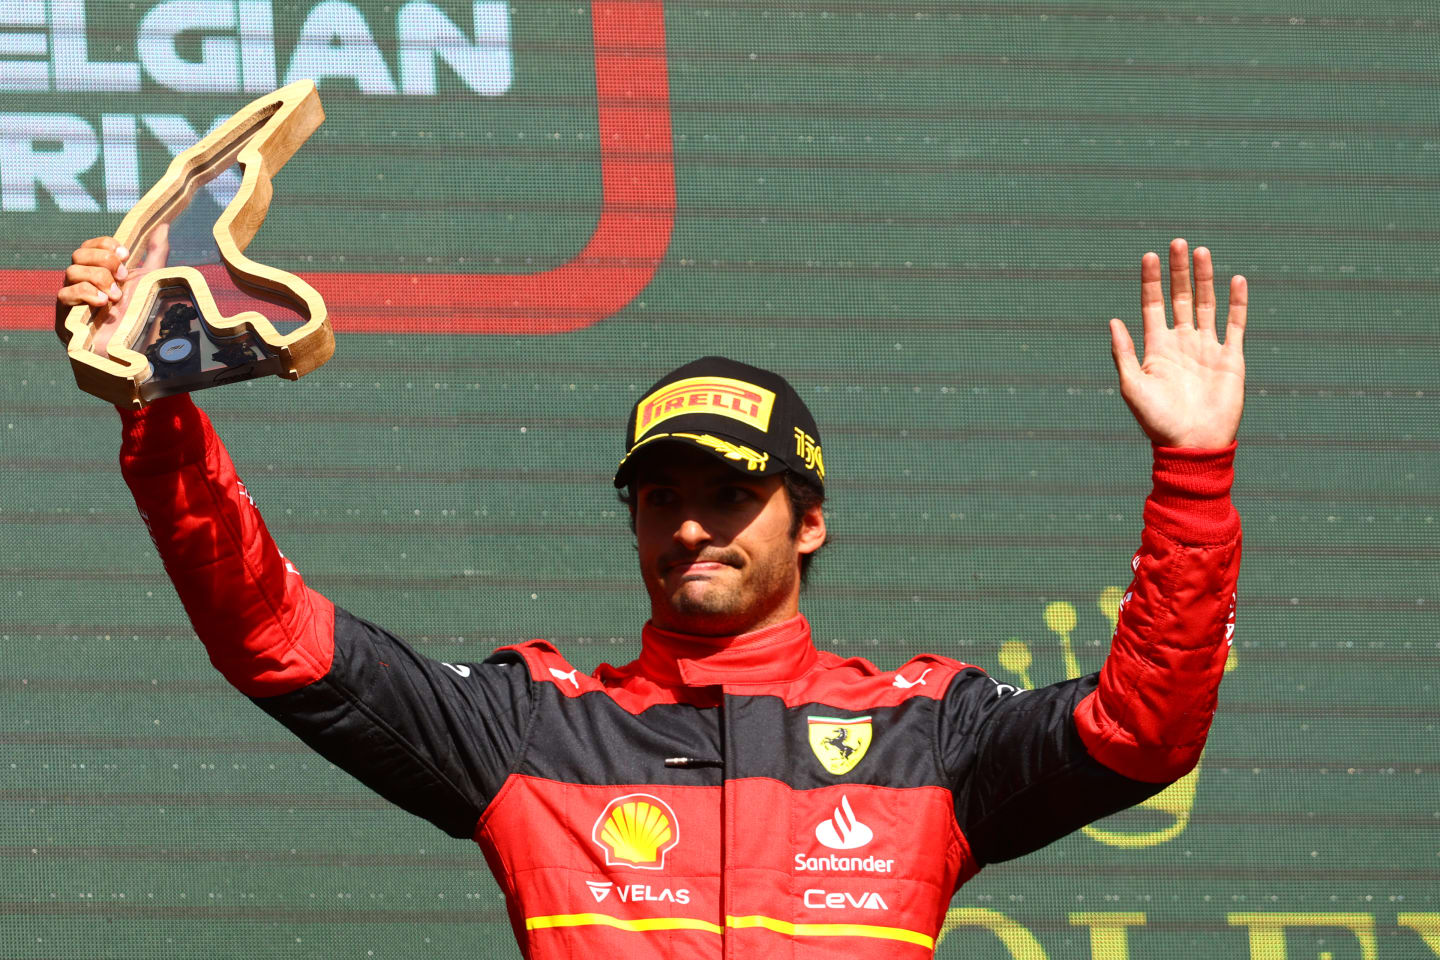 SPA, BELGIUM - AUGUST 28: Third placed Carlos Sainz of Spain and Ferrari celebrates on the podium during the F1 Grand Prix of Belgium at Circuit de Spa-Francorchamps on August 28, 2022 in Spa, Belgium. (Photo by Mark Thompson/Getty Images)